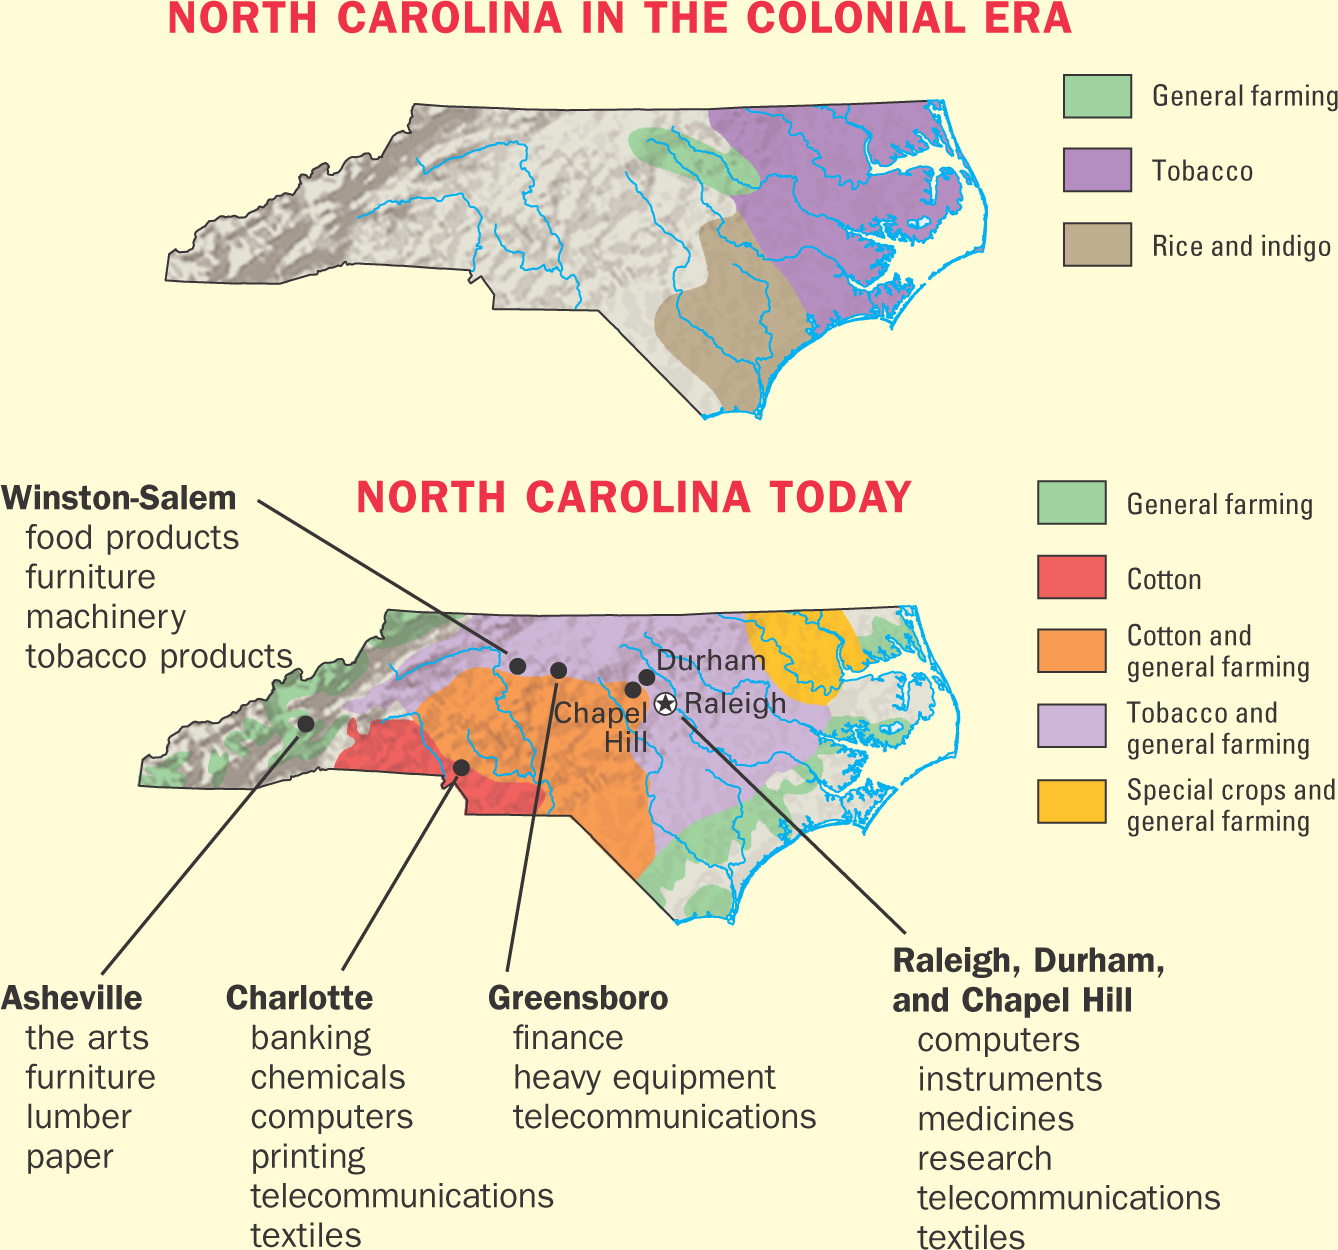 maps show North Carolina in the colonial era and today.